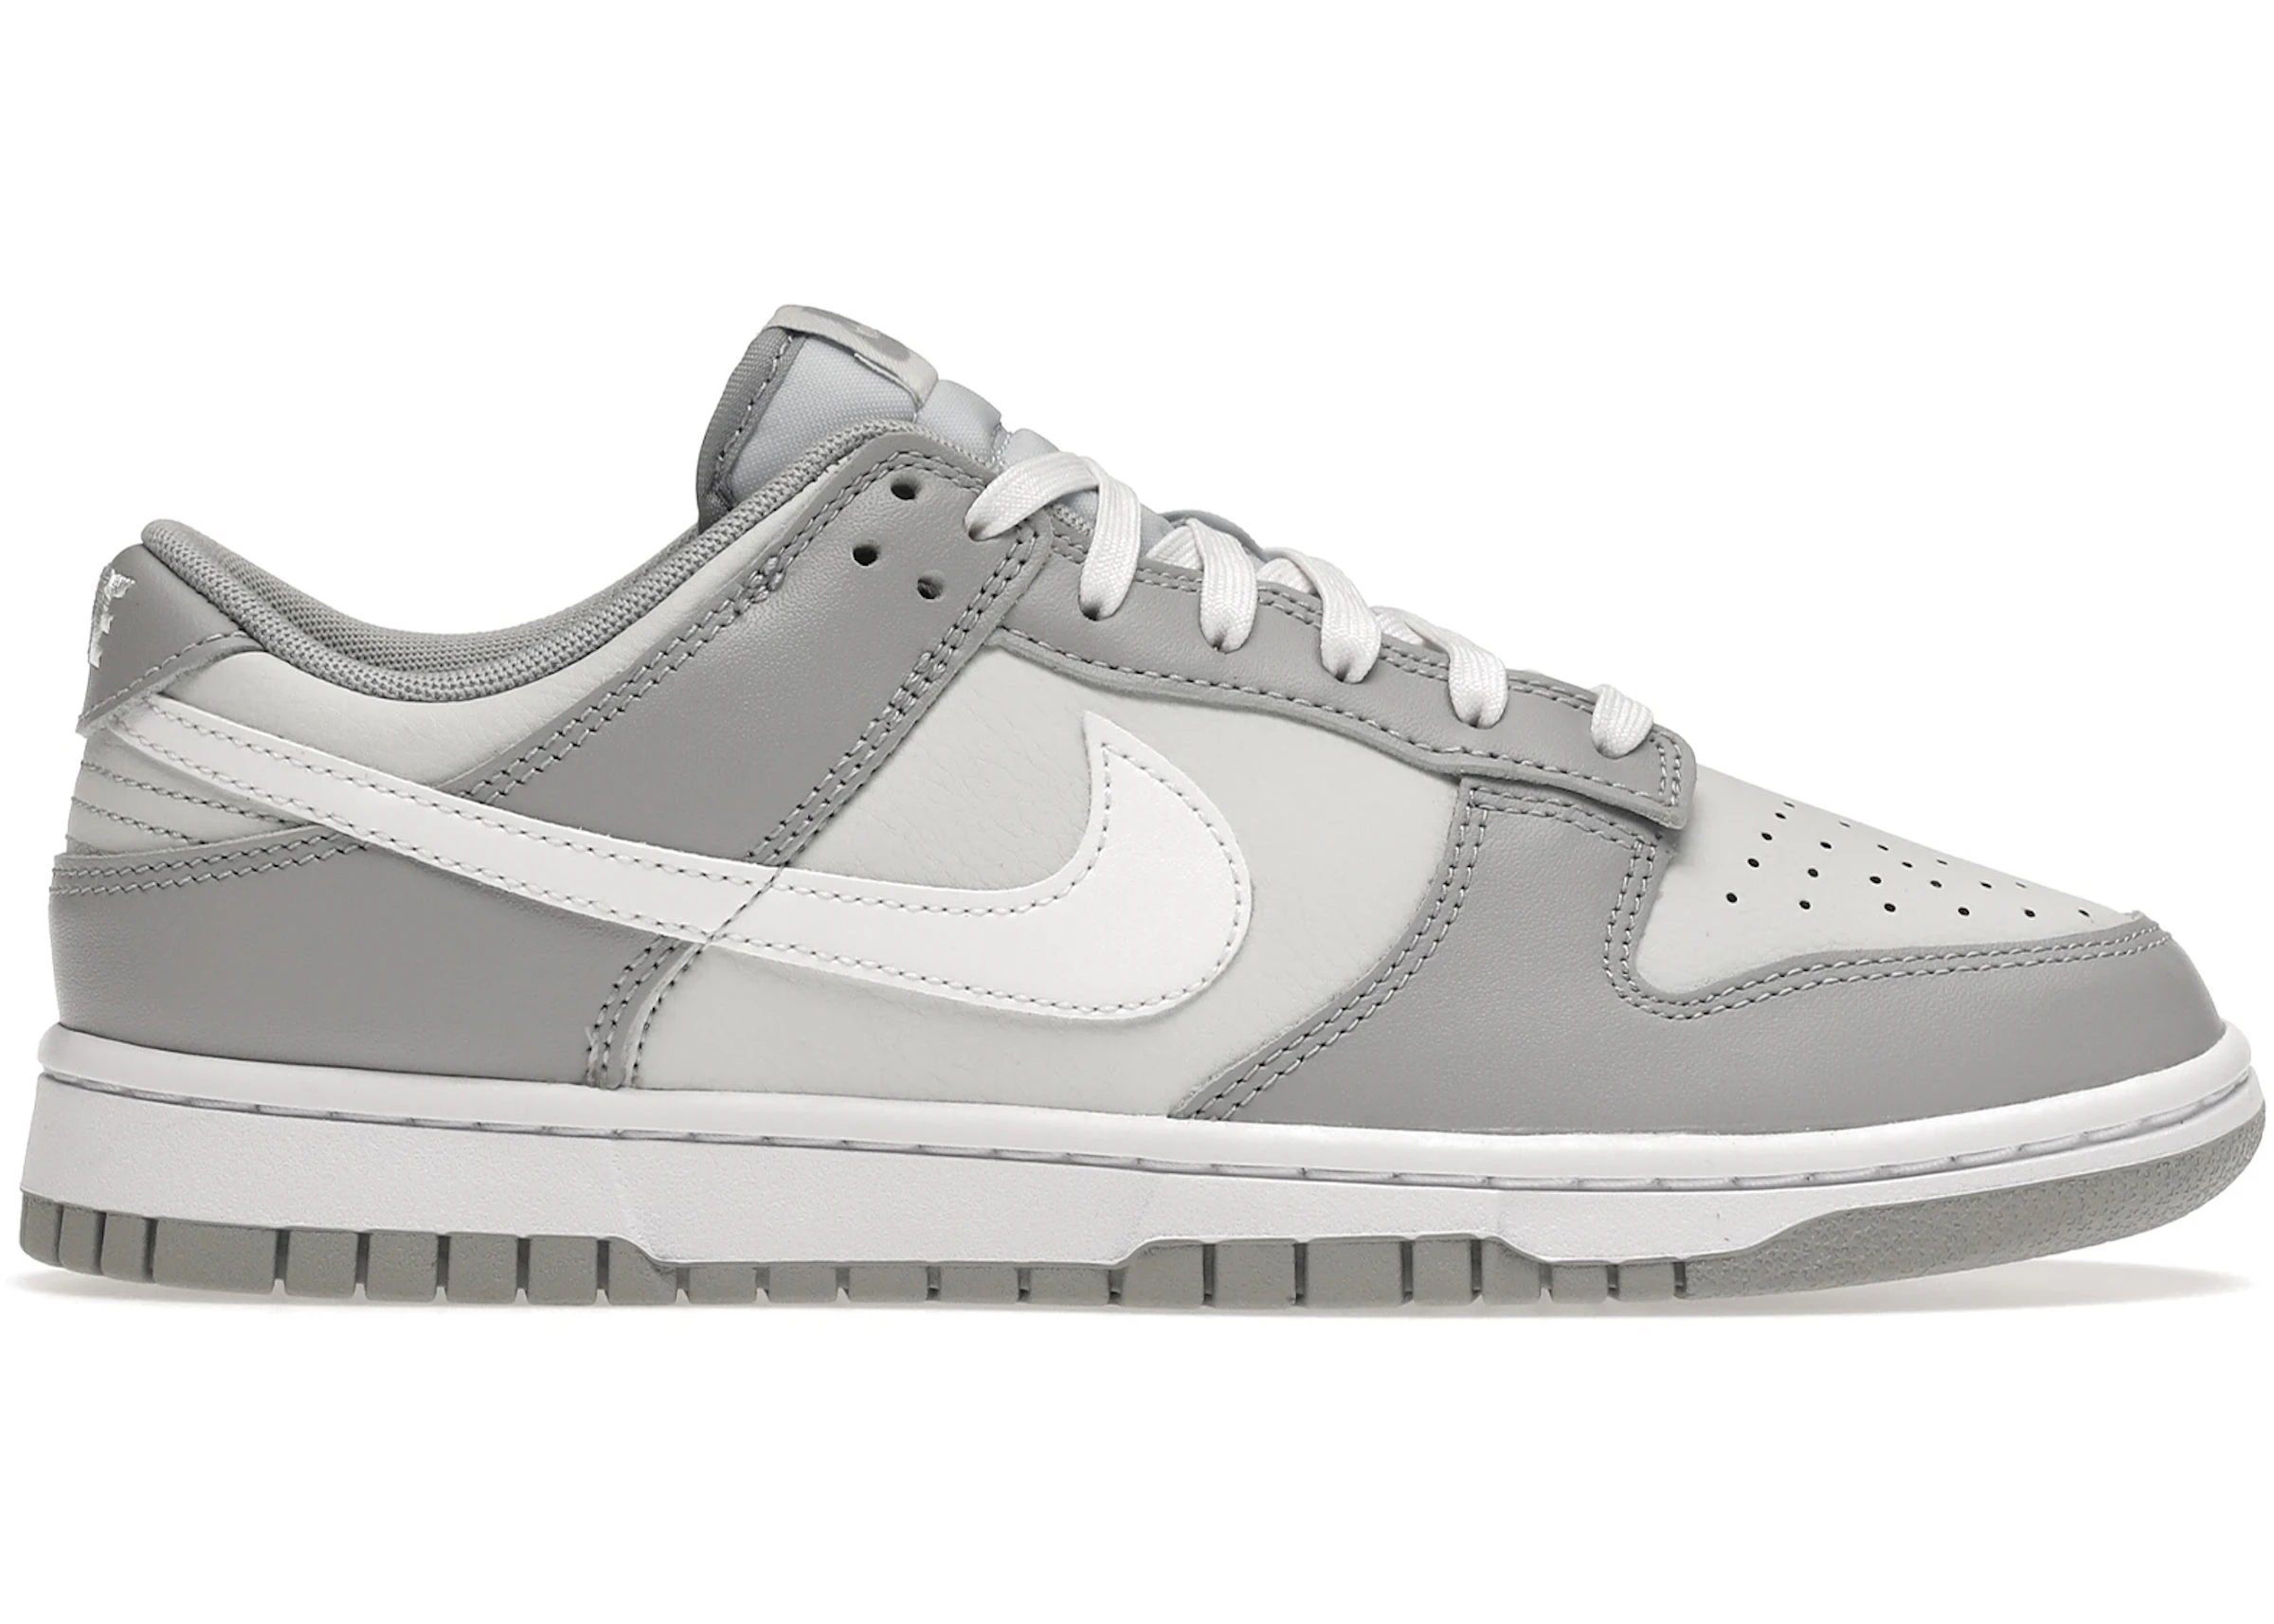 Nike Dunk Low Two Tone Grey: Sleek And Sophisticated Sneakers In Two ...